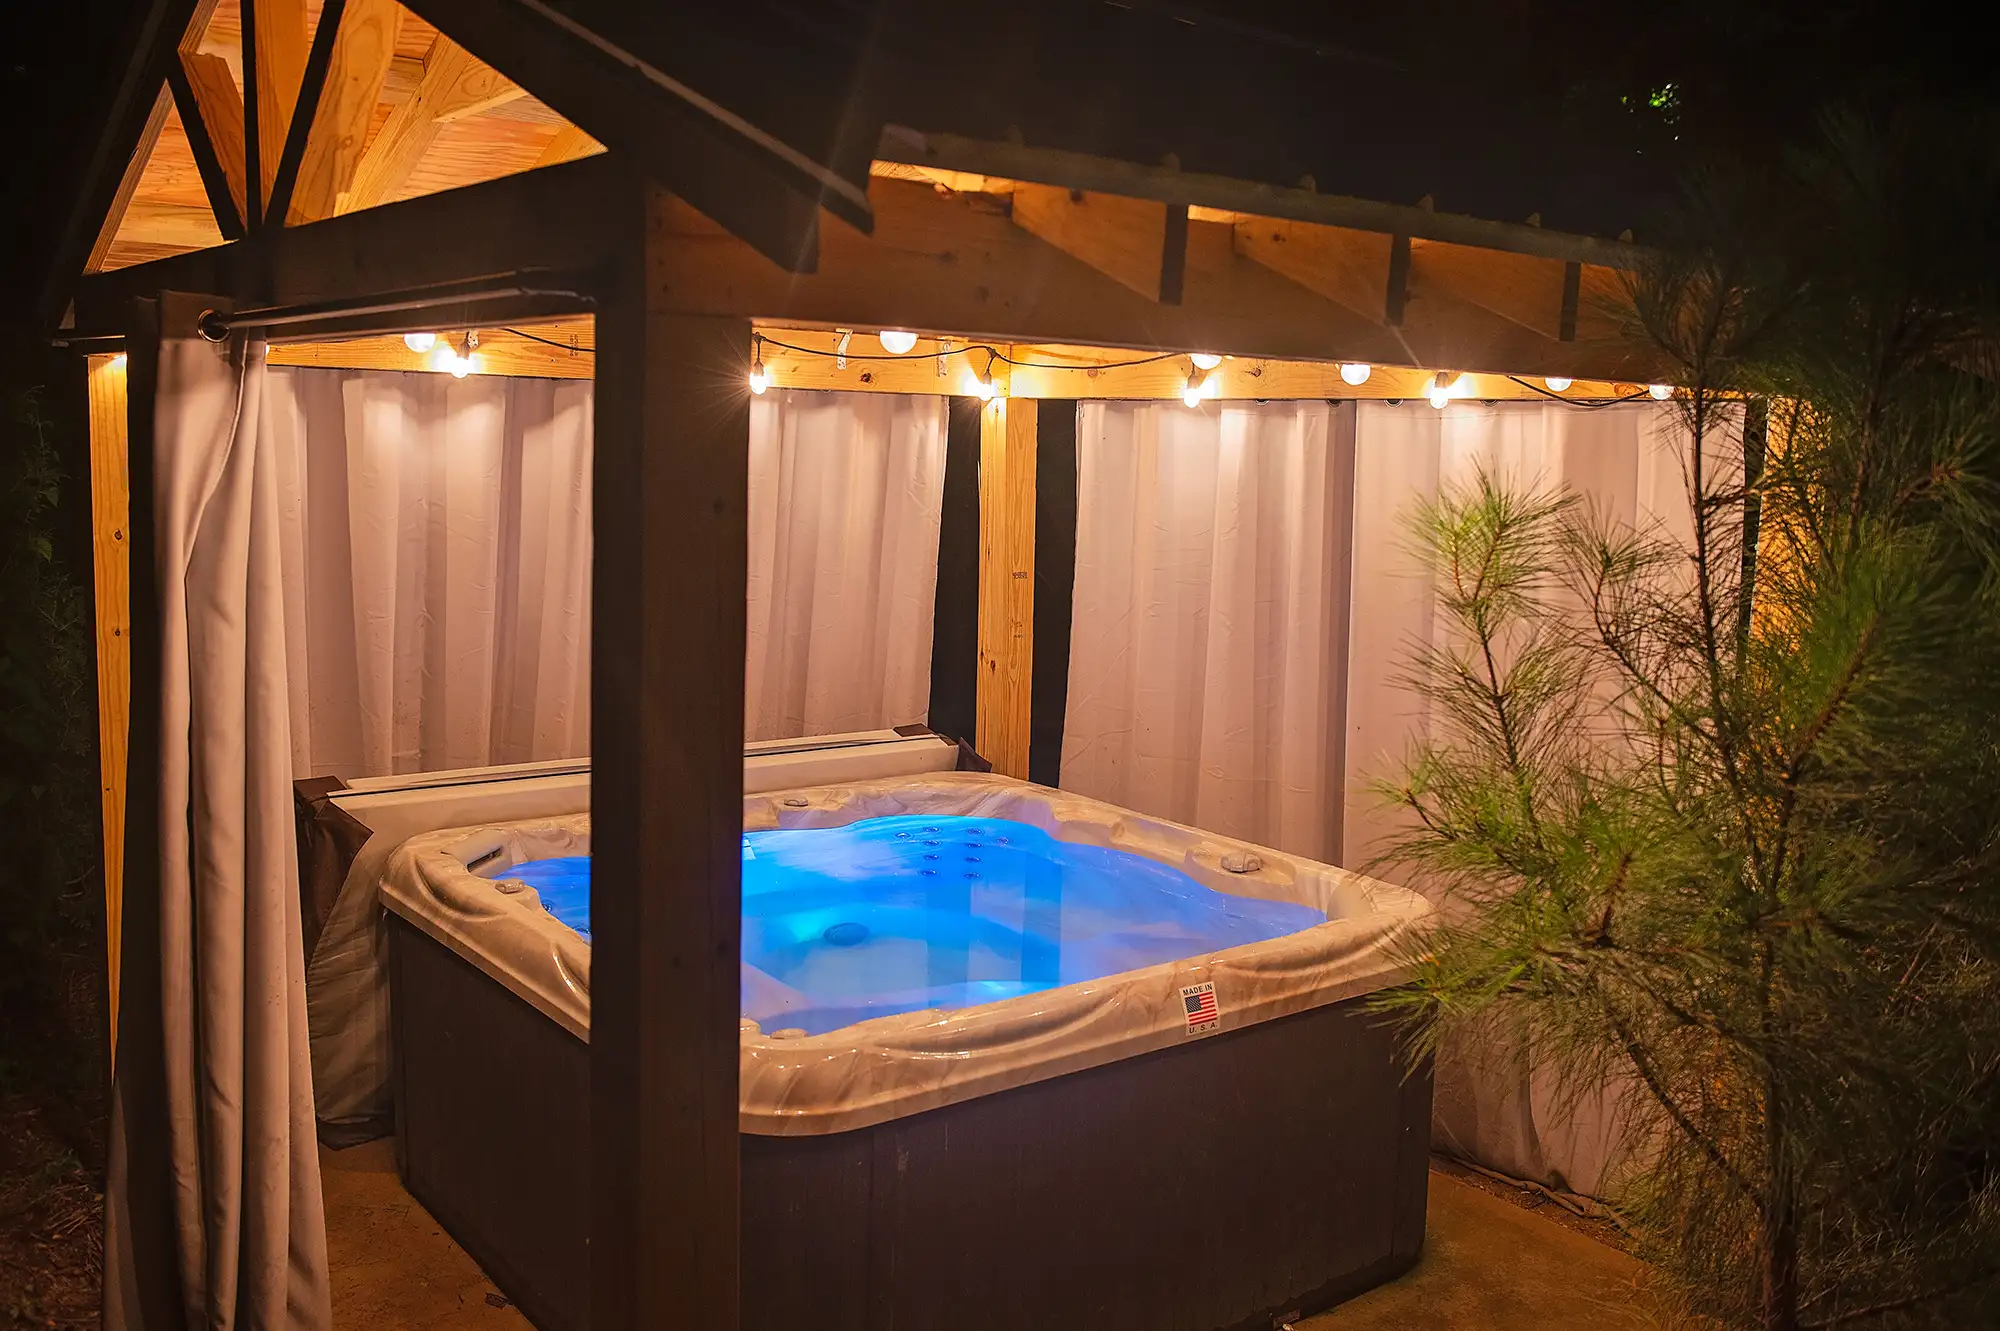 Hot tub at night under a cabana strung with twinkle lights